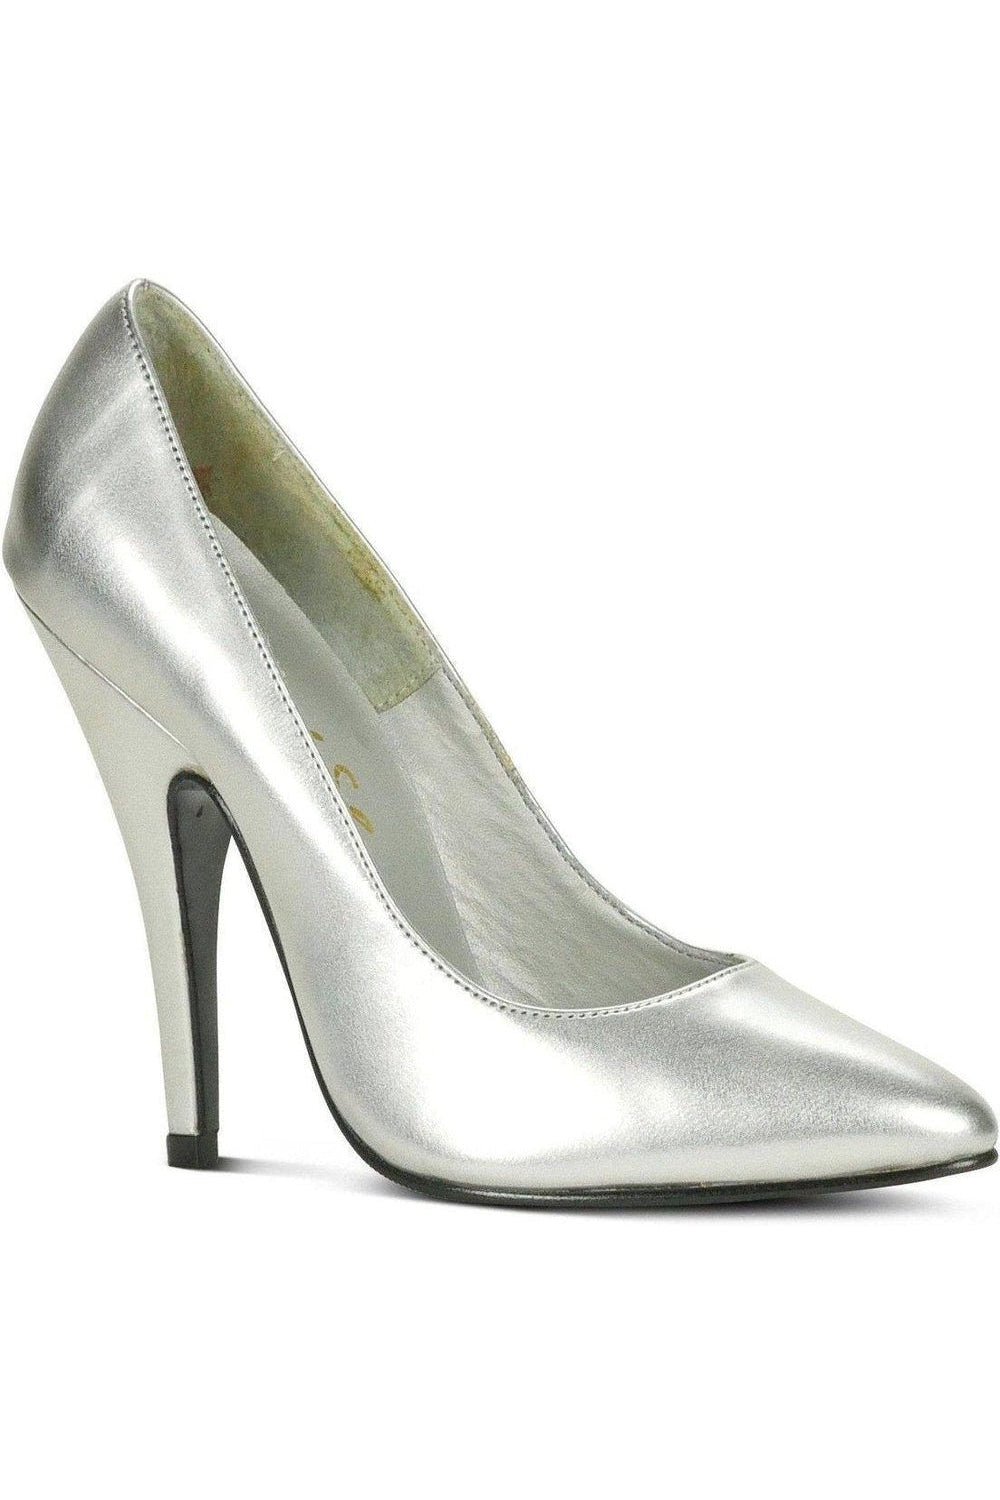 Sexy-4211 Vintage High Heel Pump | Silver Metallic-Sexyshoes Brand-Silver-Pumps-SEXYSHOES.COM